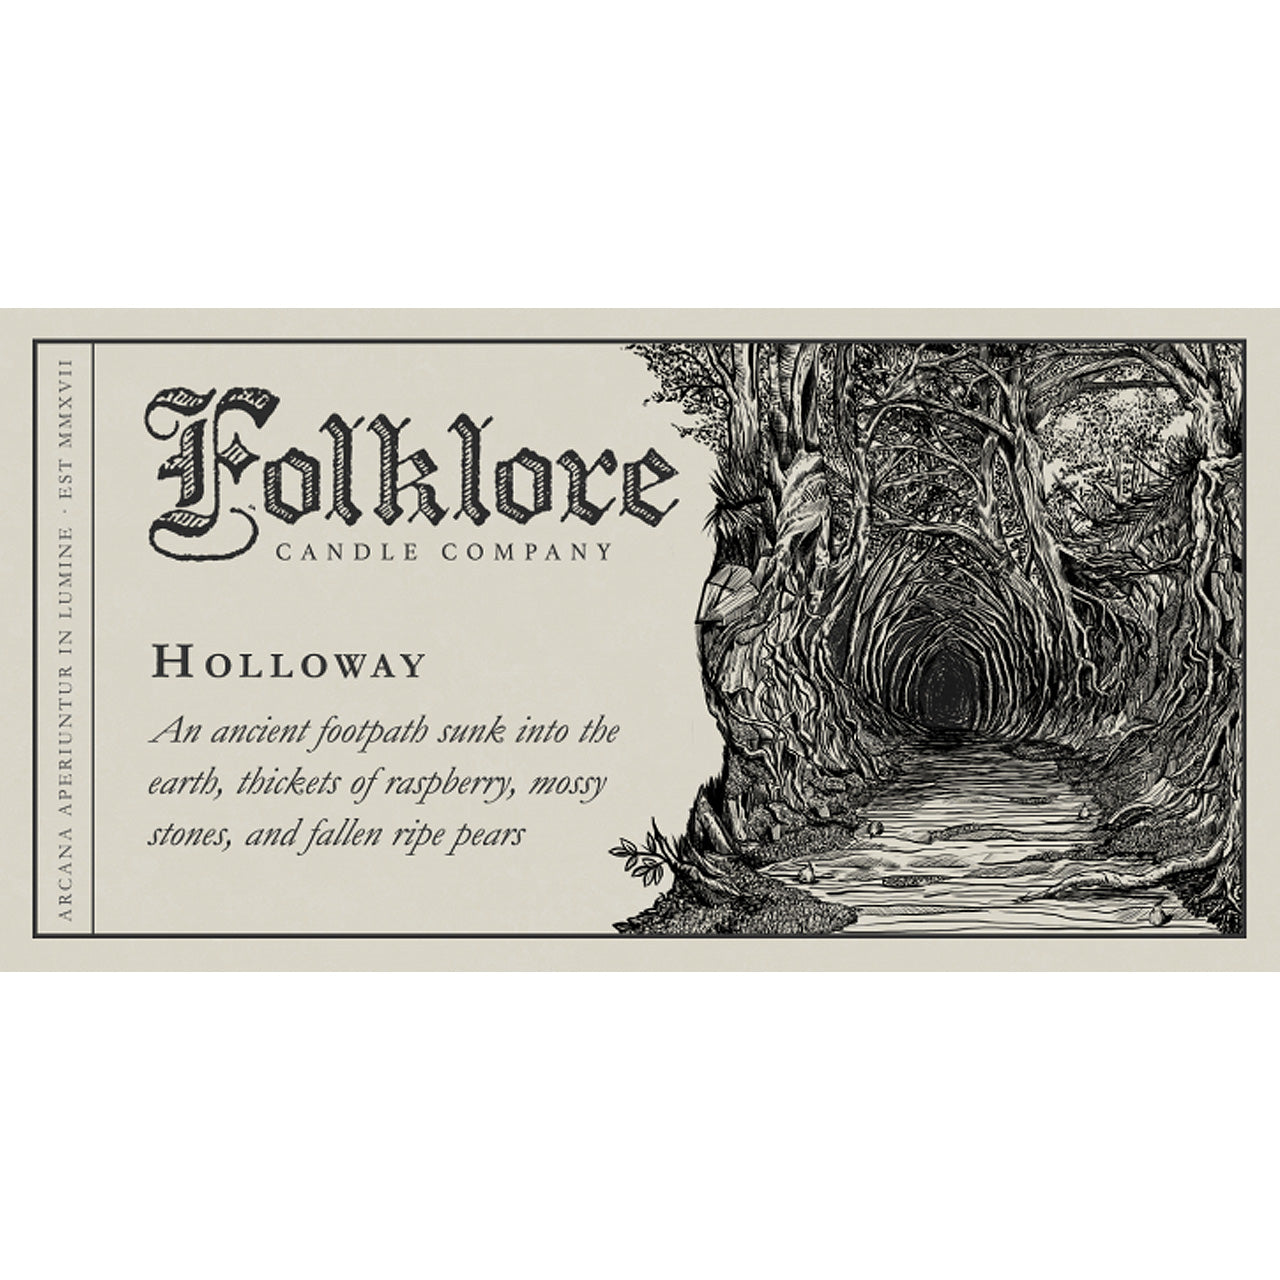 Holloway - Folklore Candle Company